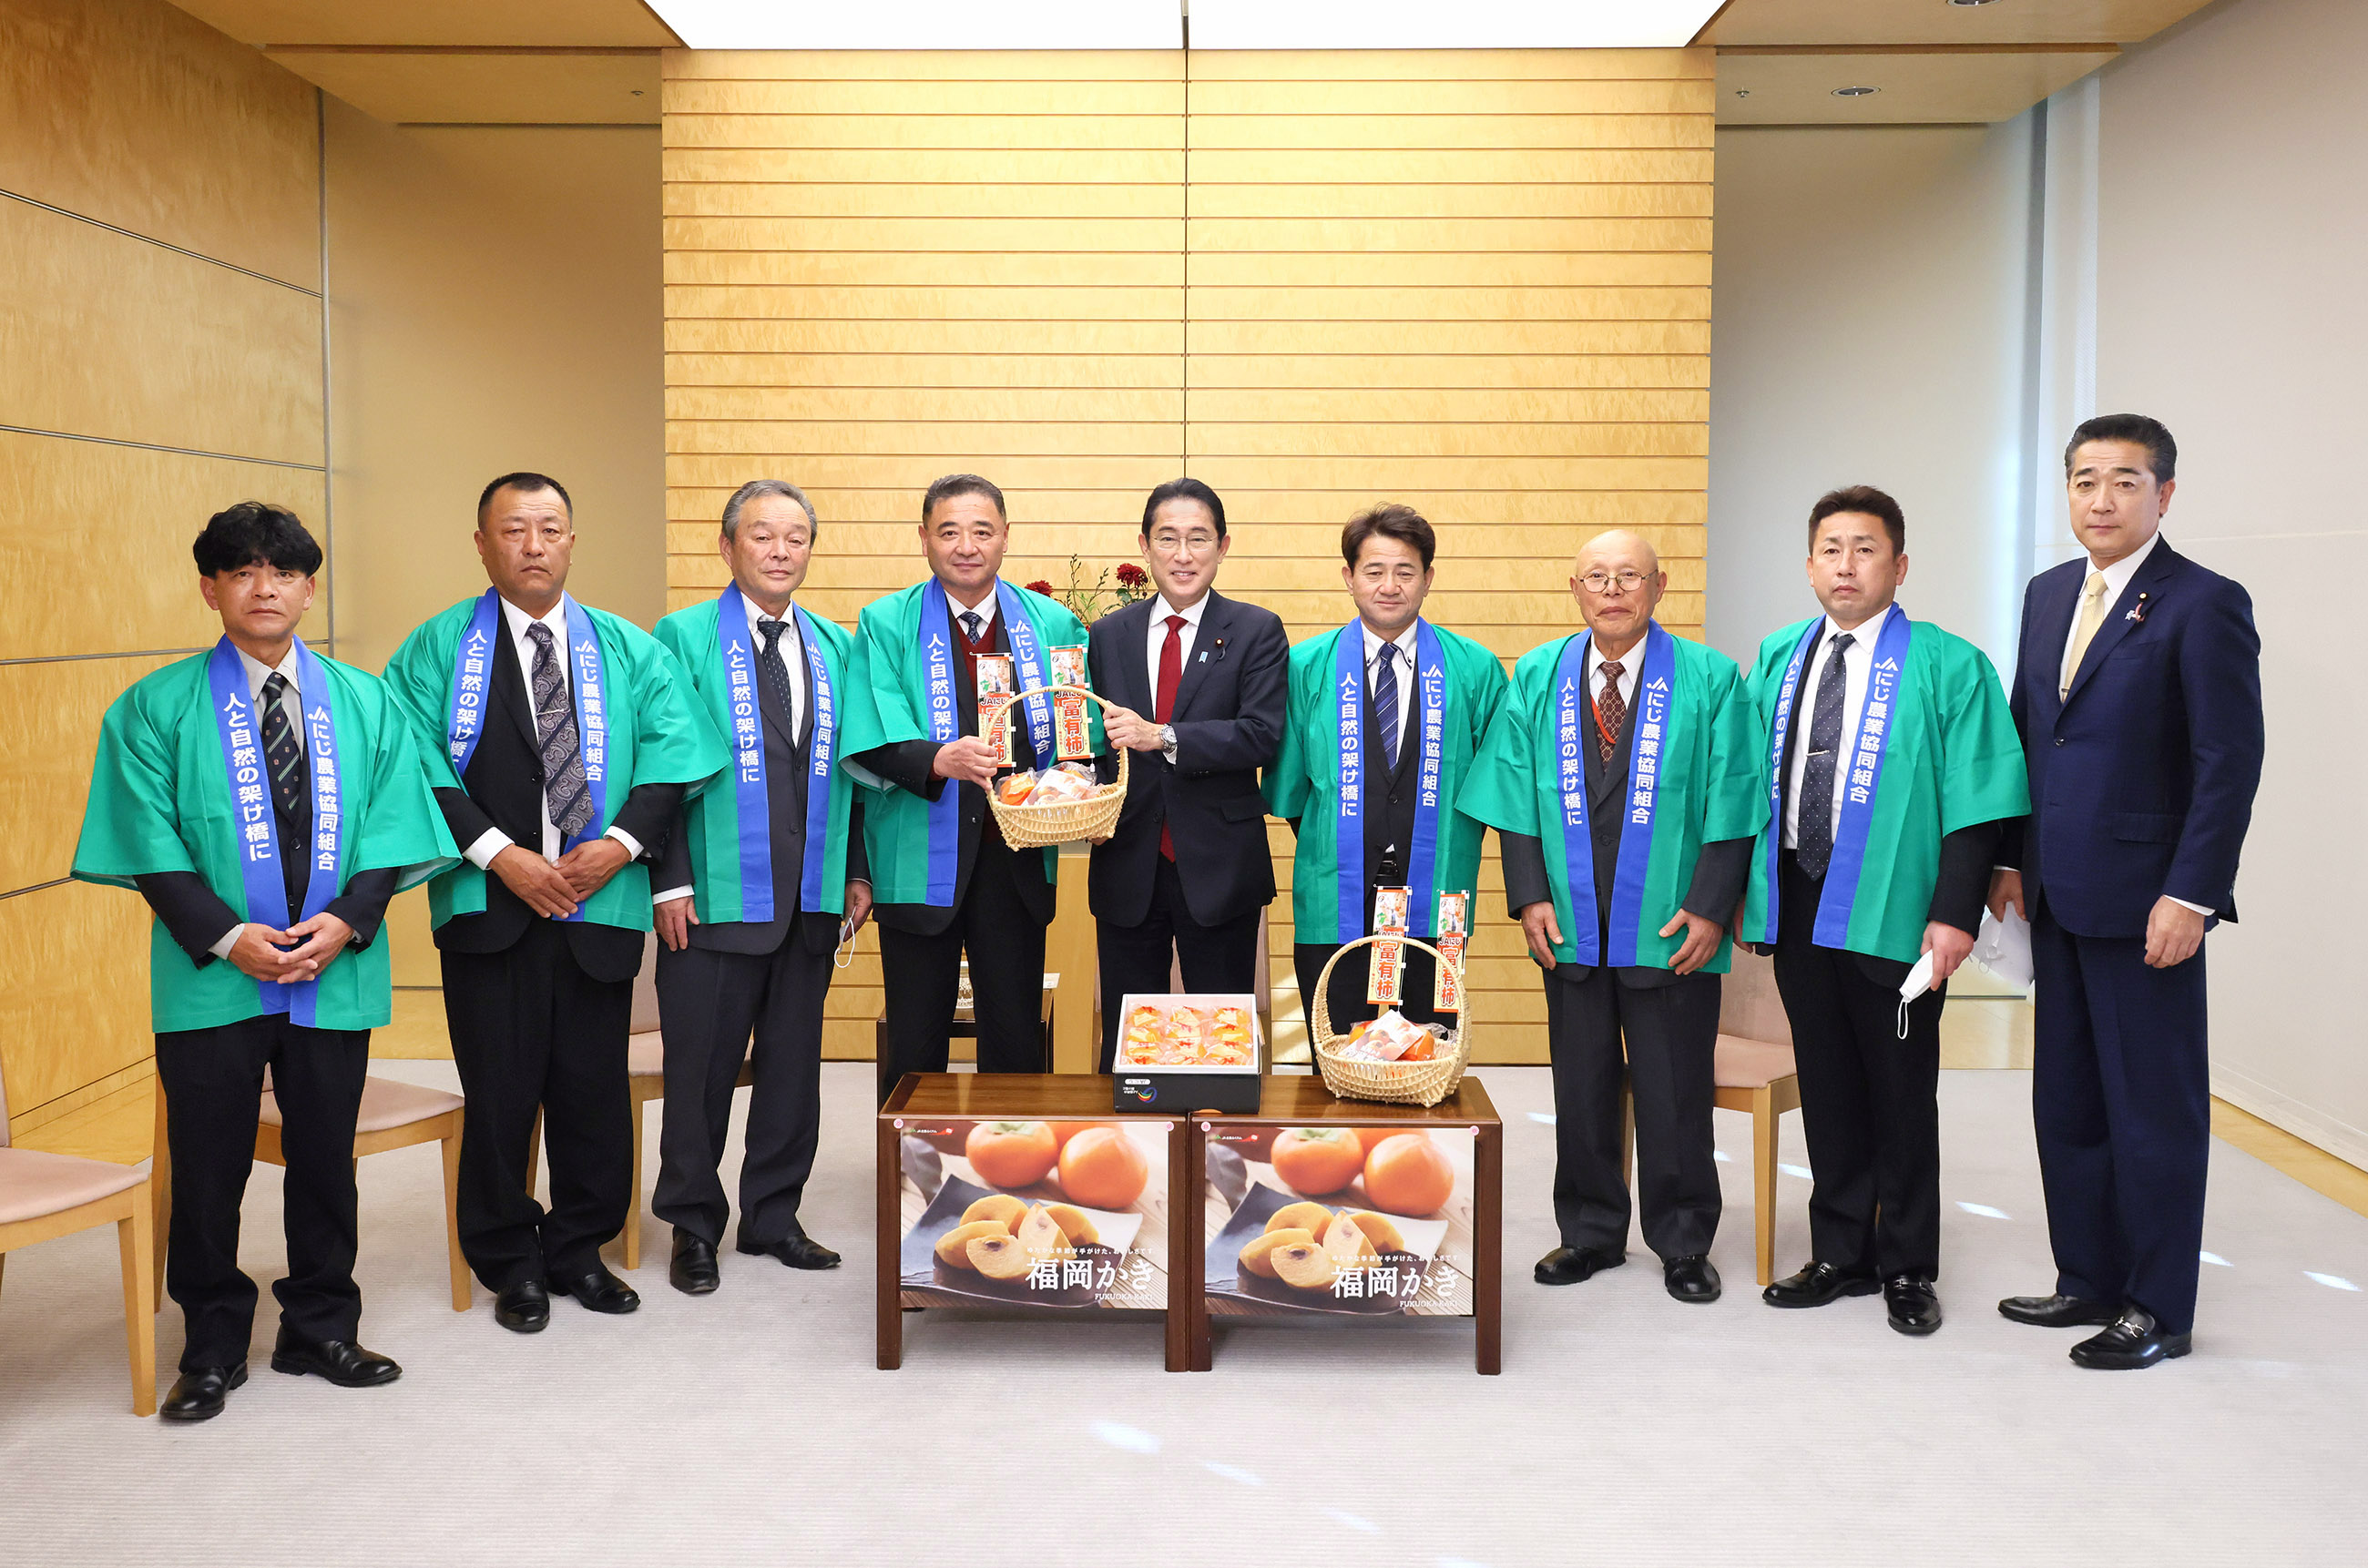 Presentation of Persimmons by Japan Agricultural Cooperatives (JA) Niji